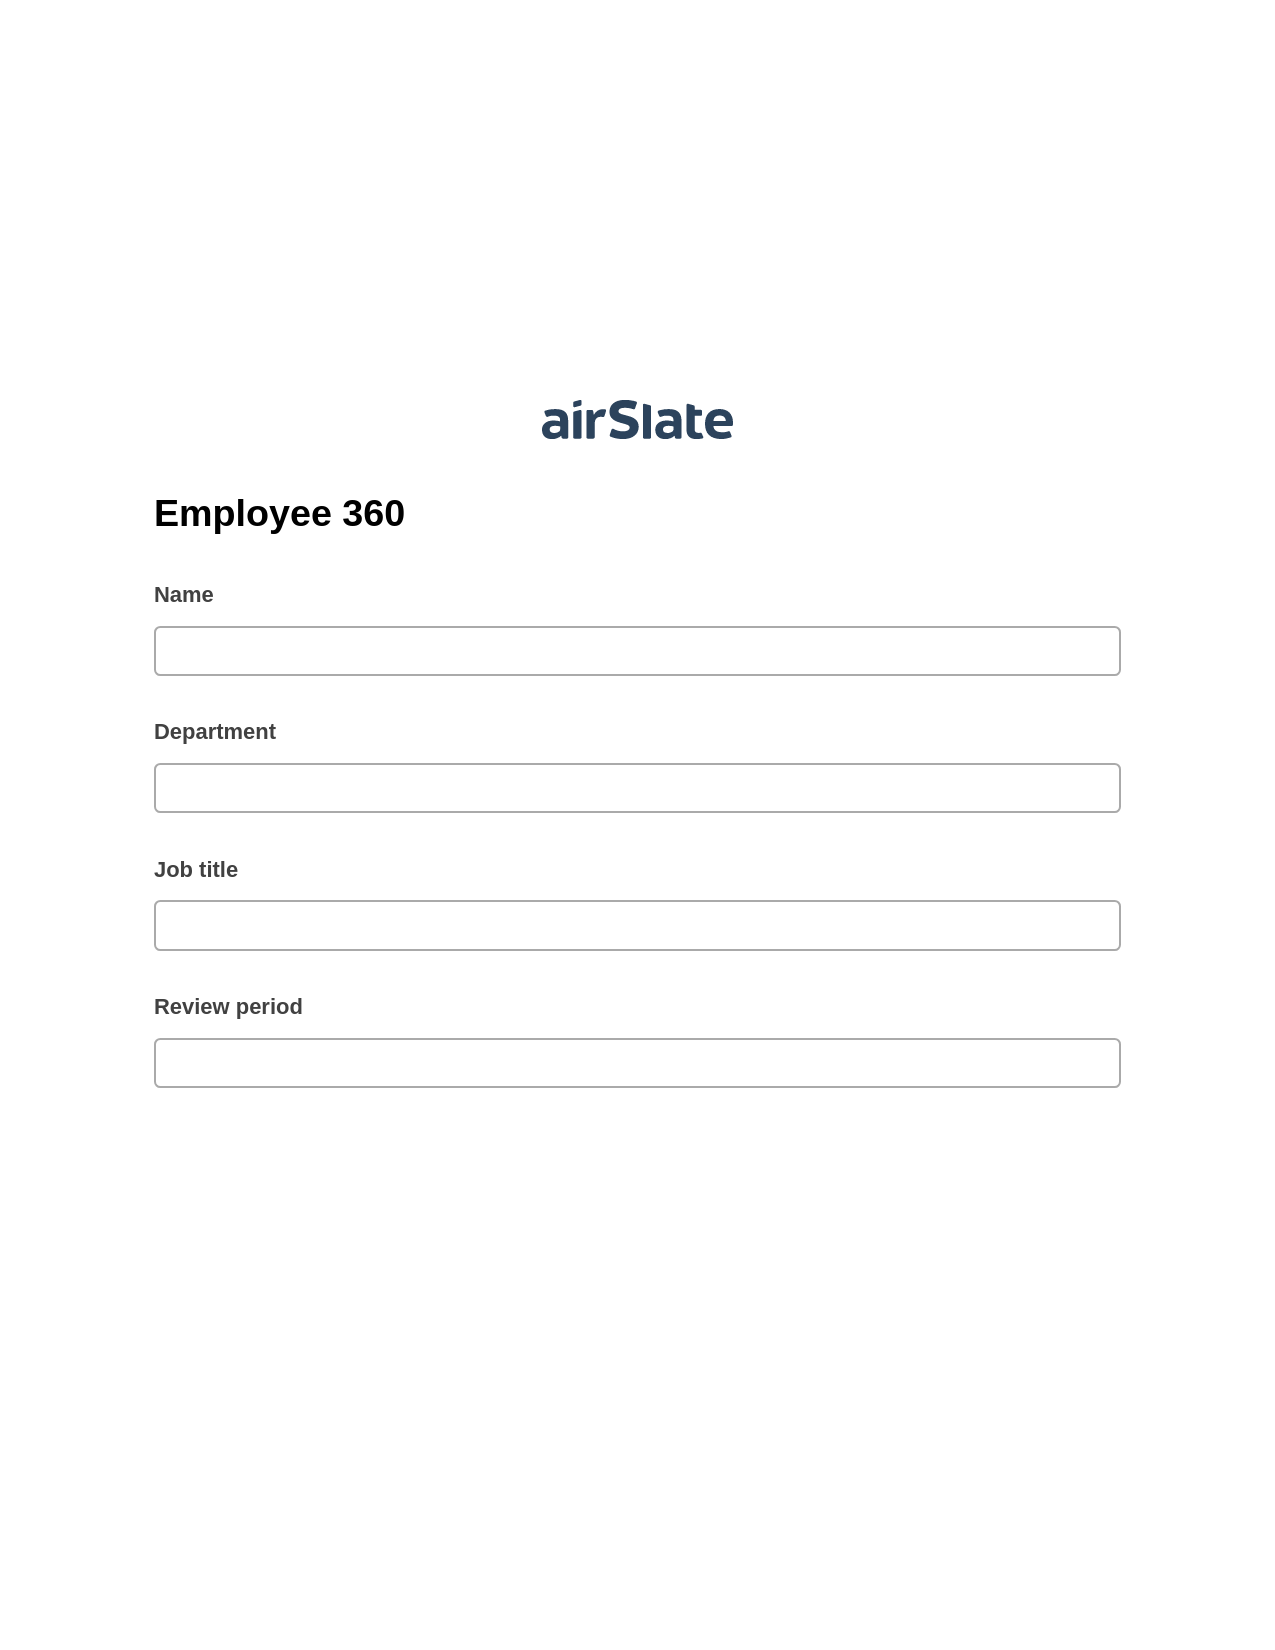 Multirole Employee 360 Pre-fill Dropdowns from Airtable, Update MS Dynamics 365 Record Bot, Post-finish Document Bot